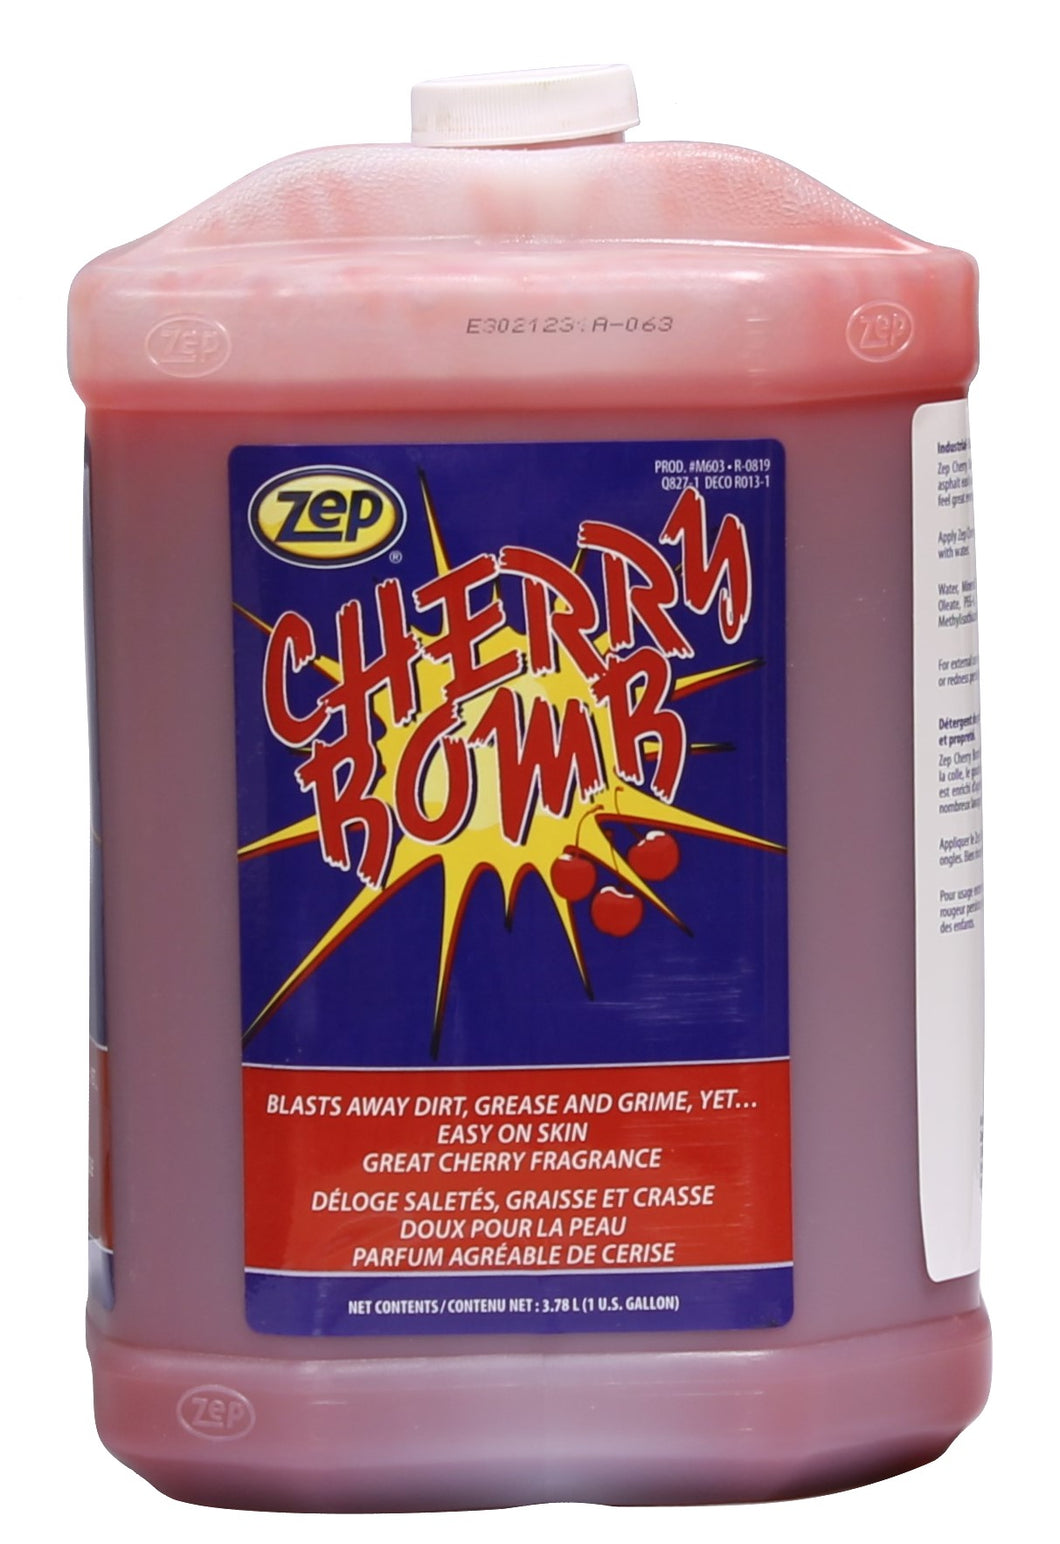 Zep Cherry Bomb NPE FREE Hand Soap 1 Gal with Hand Pump